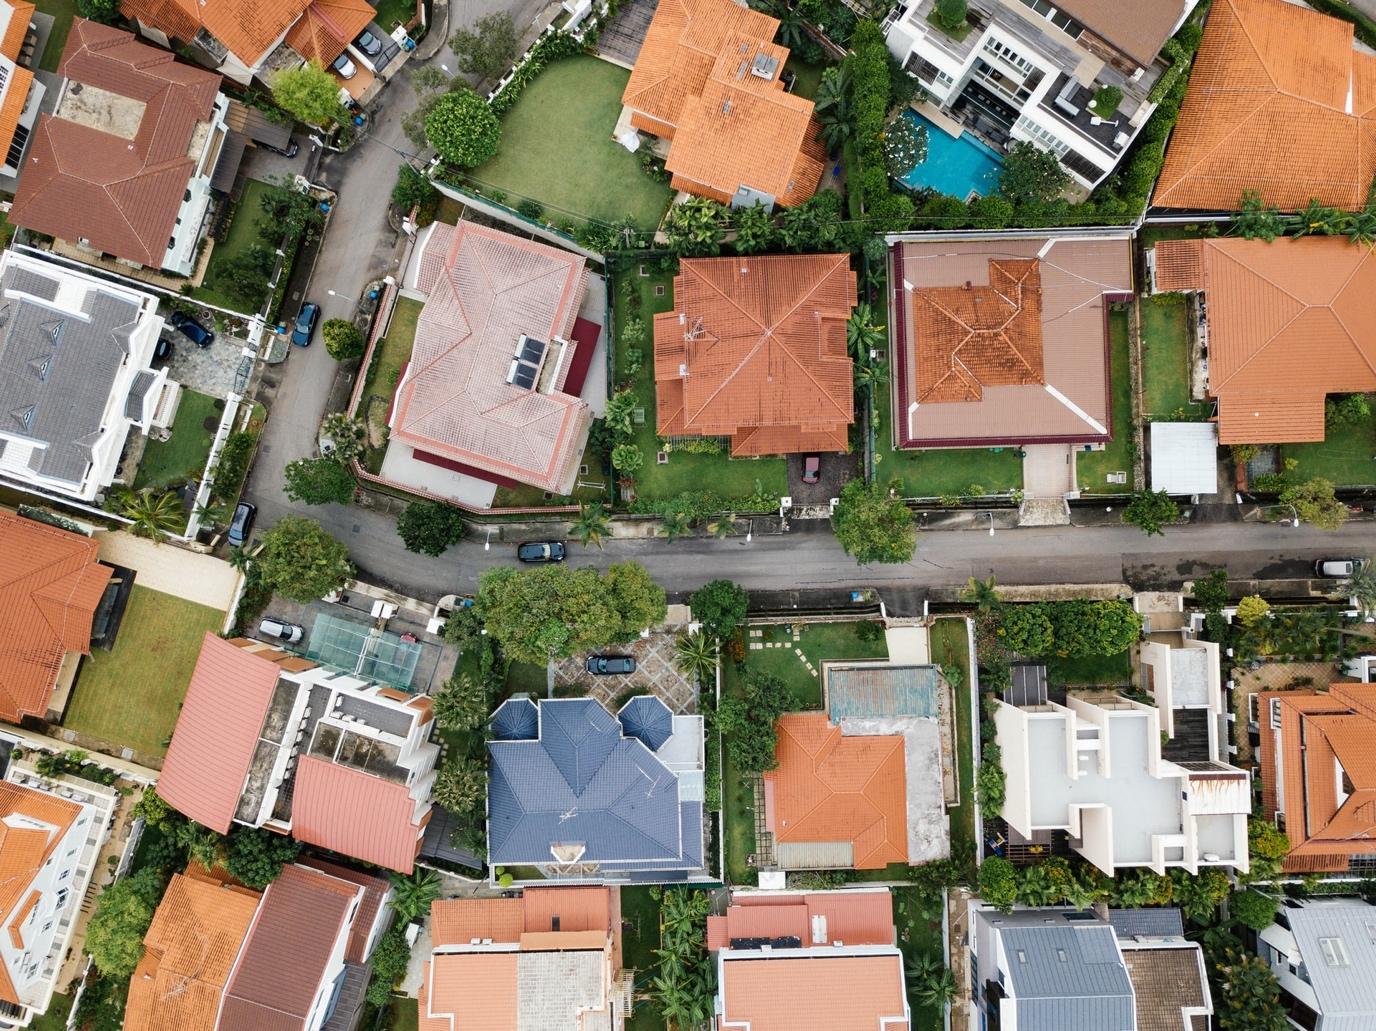 Aerial view of a neighborhood

Description automatically generated with low confidence